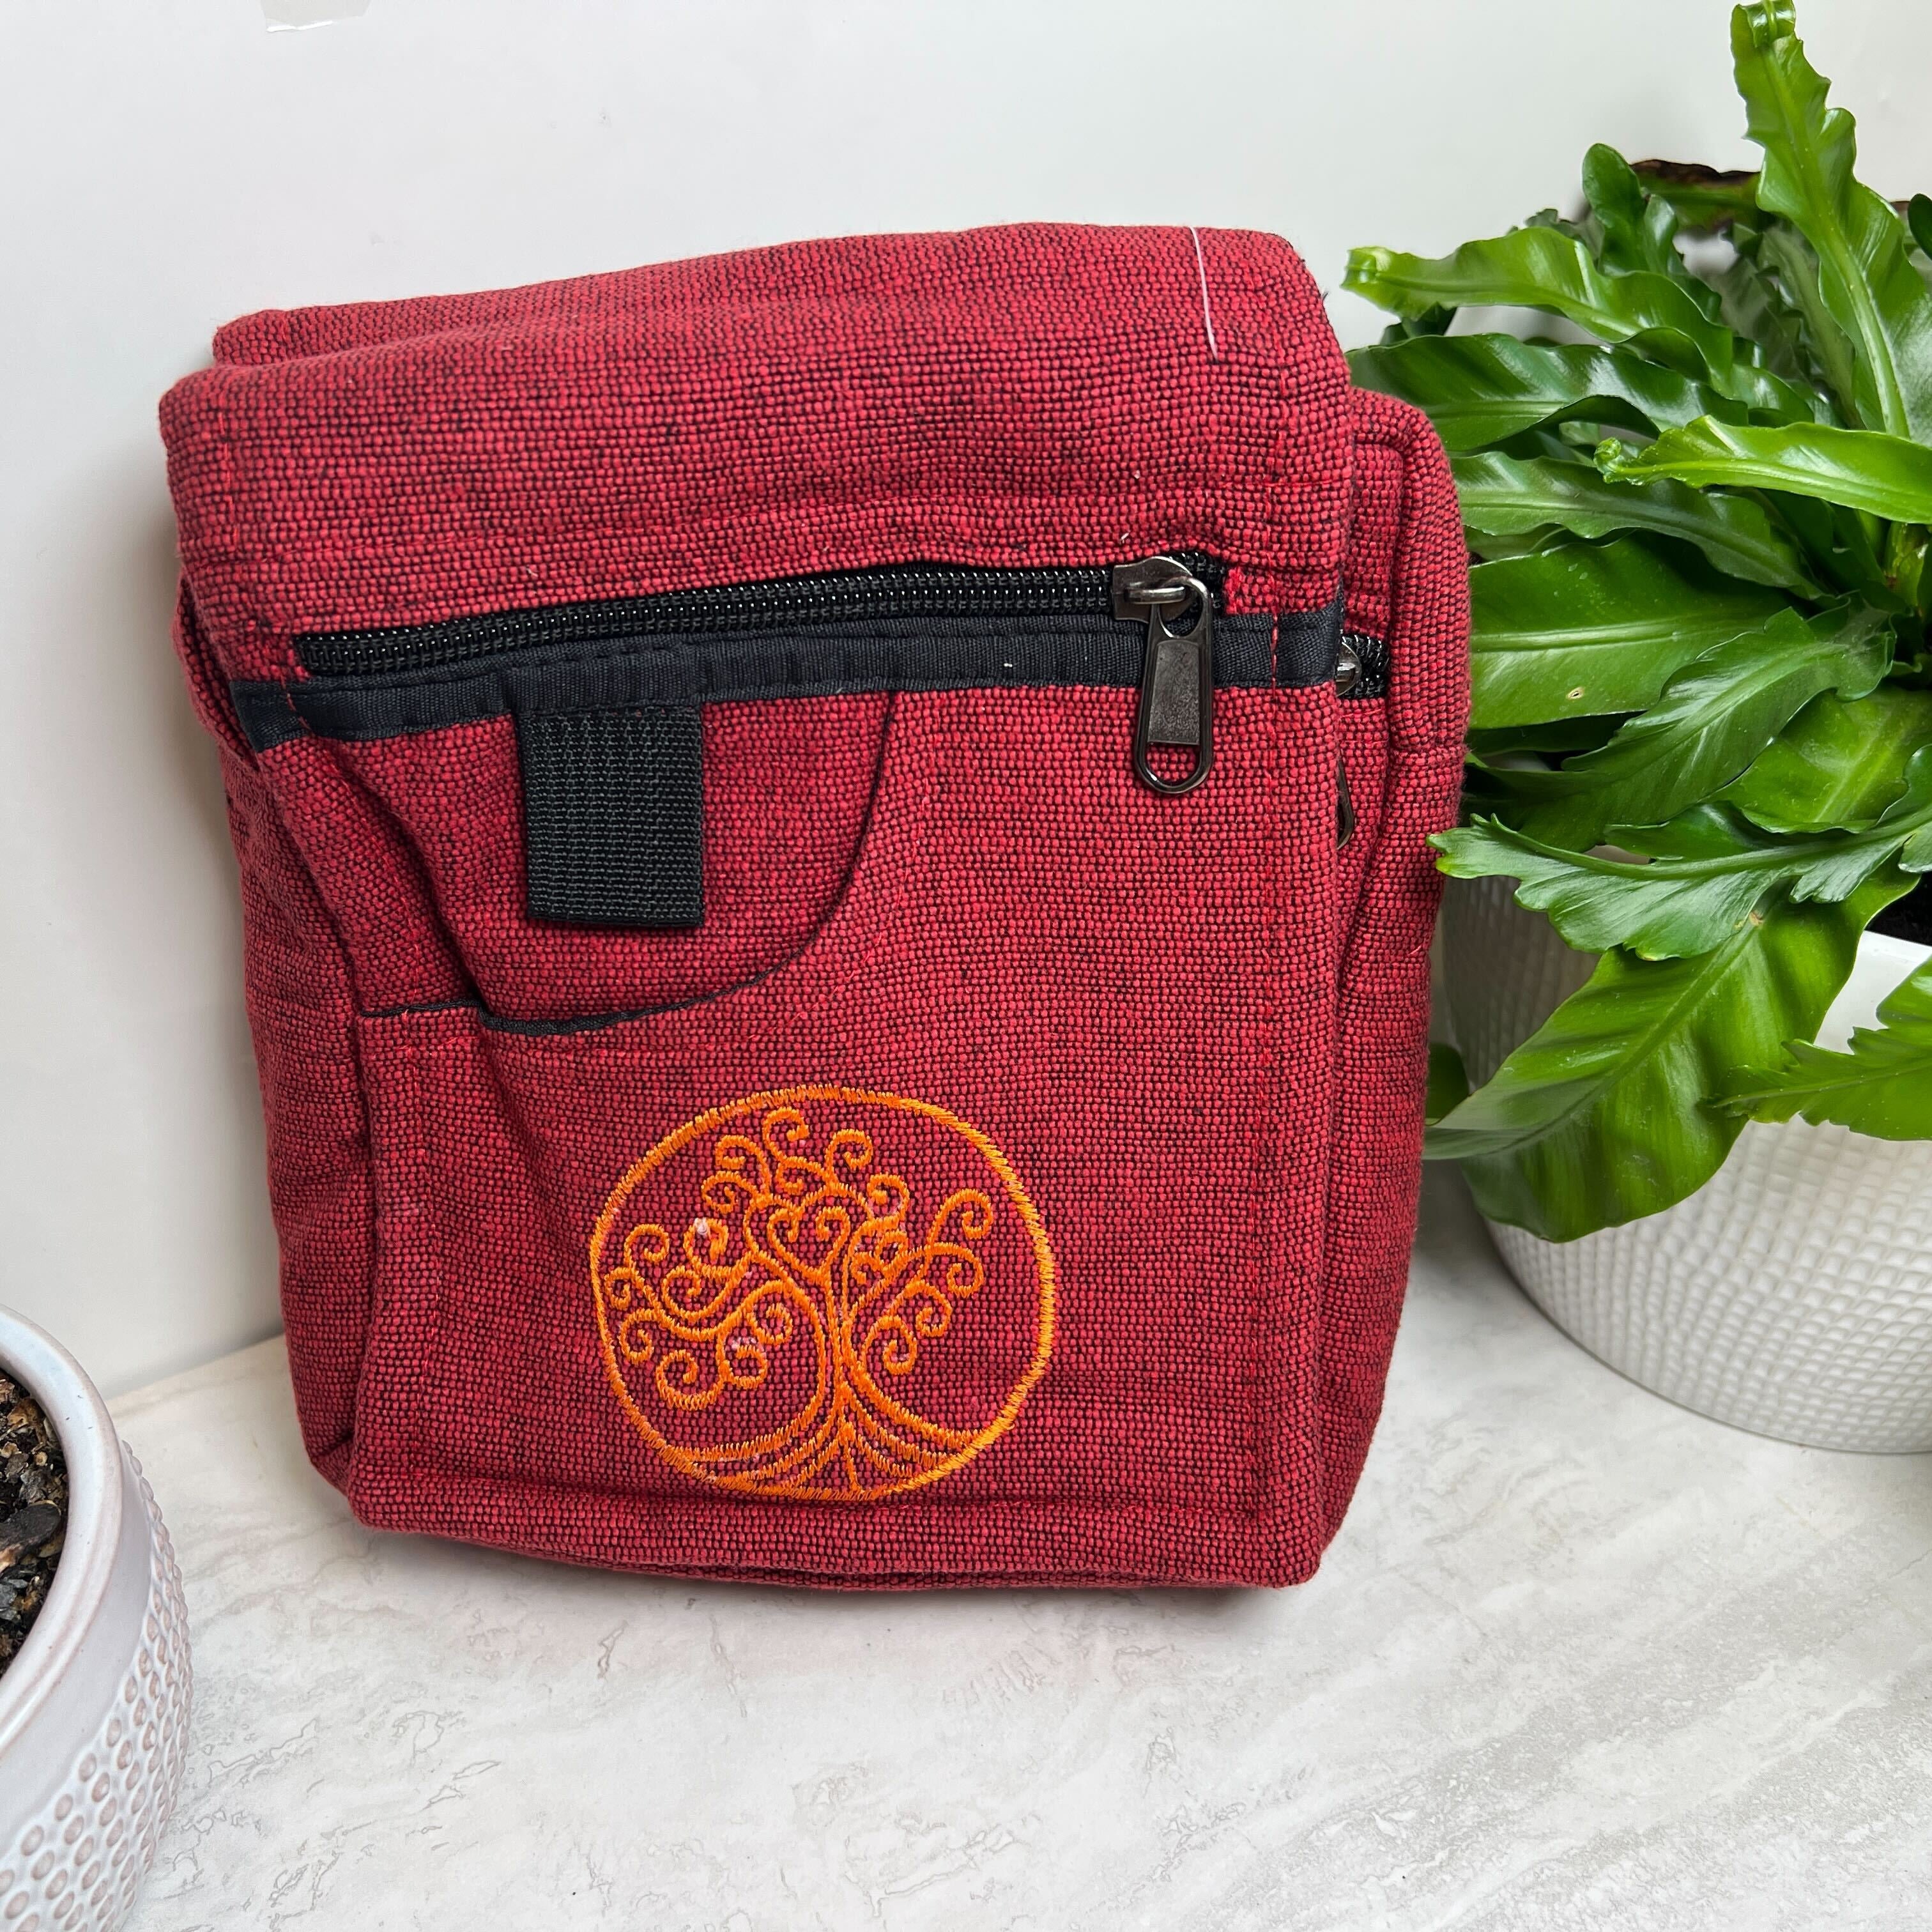 Earth's Elements Satchels - Assorted